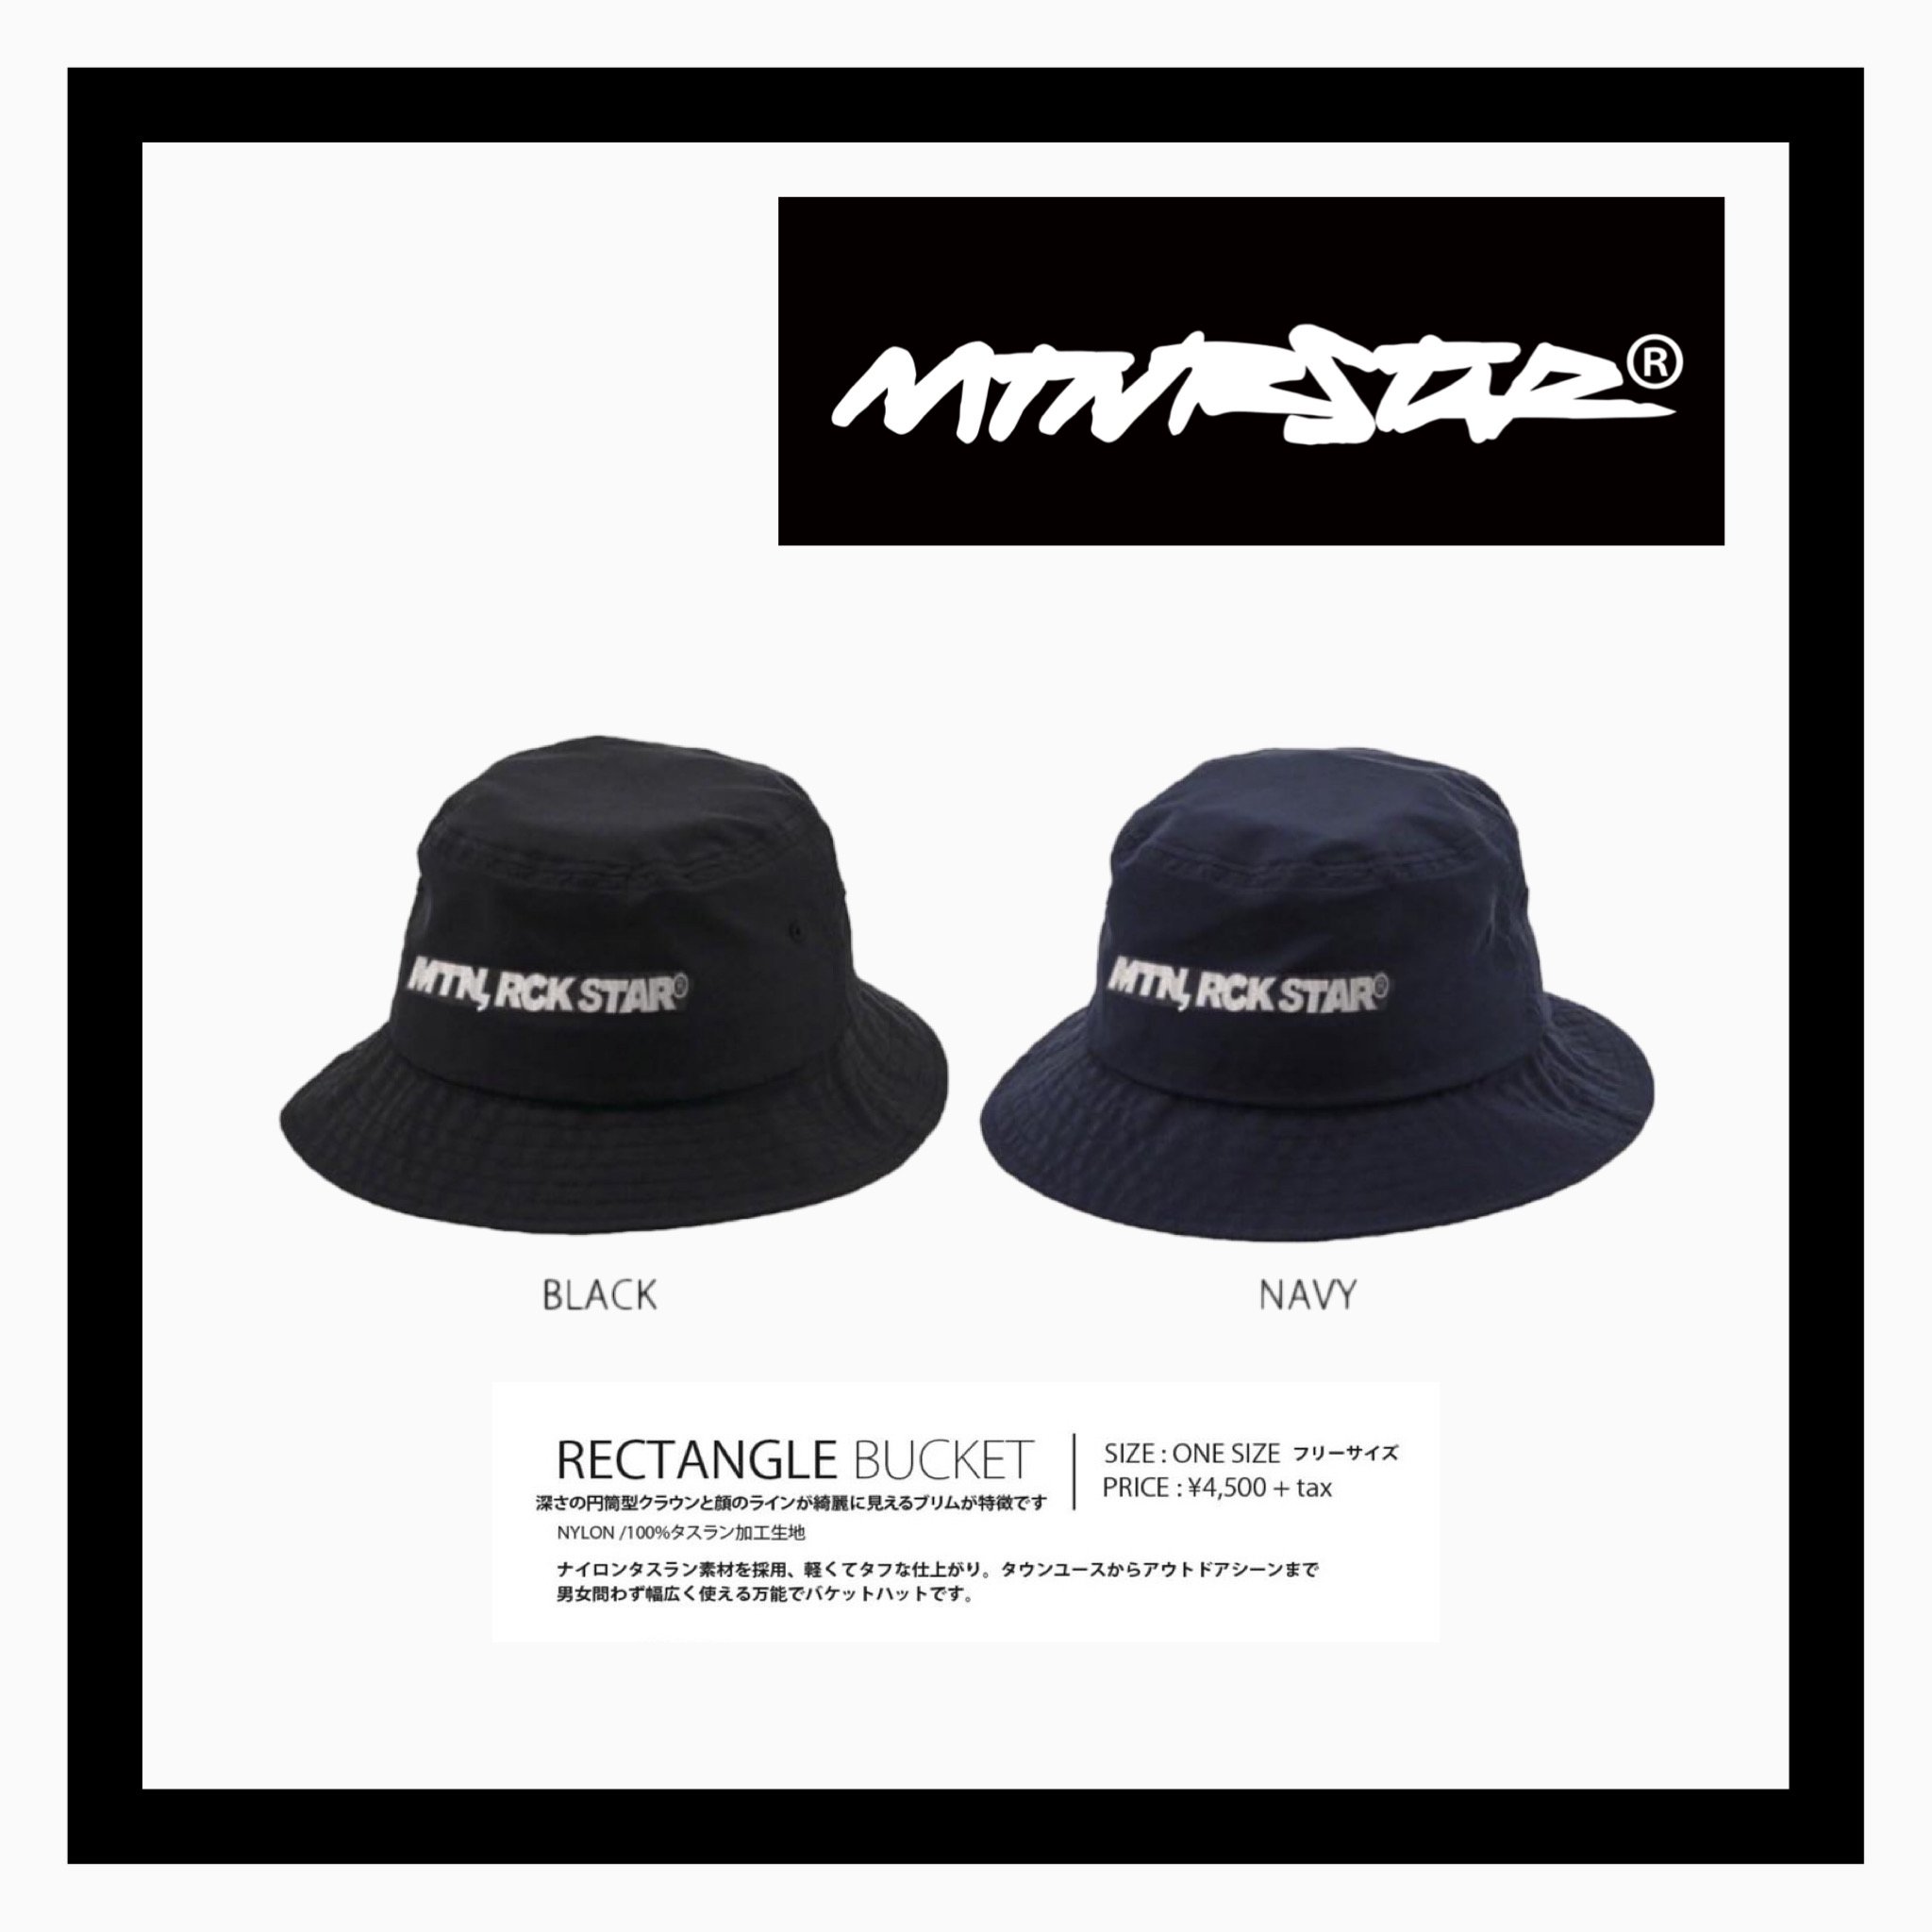 <img class='new_mark_img1' src='https://img.shop-pro.jp/img/new/icons14.gif' style='border:none;display:inline;margin:0px;padding:0px;width:auto;' />MOUNTAIN ROCK STAR Summer Apparel RECTANGLE BUCKET & RECTANGLE CAP